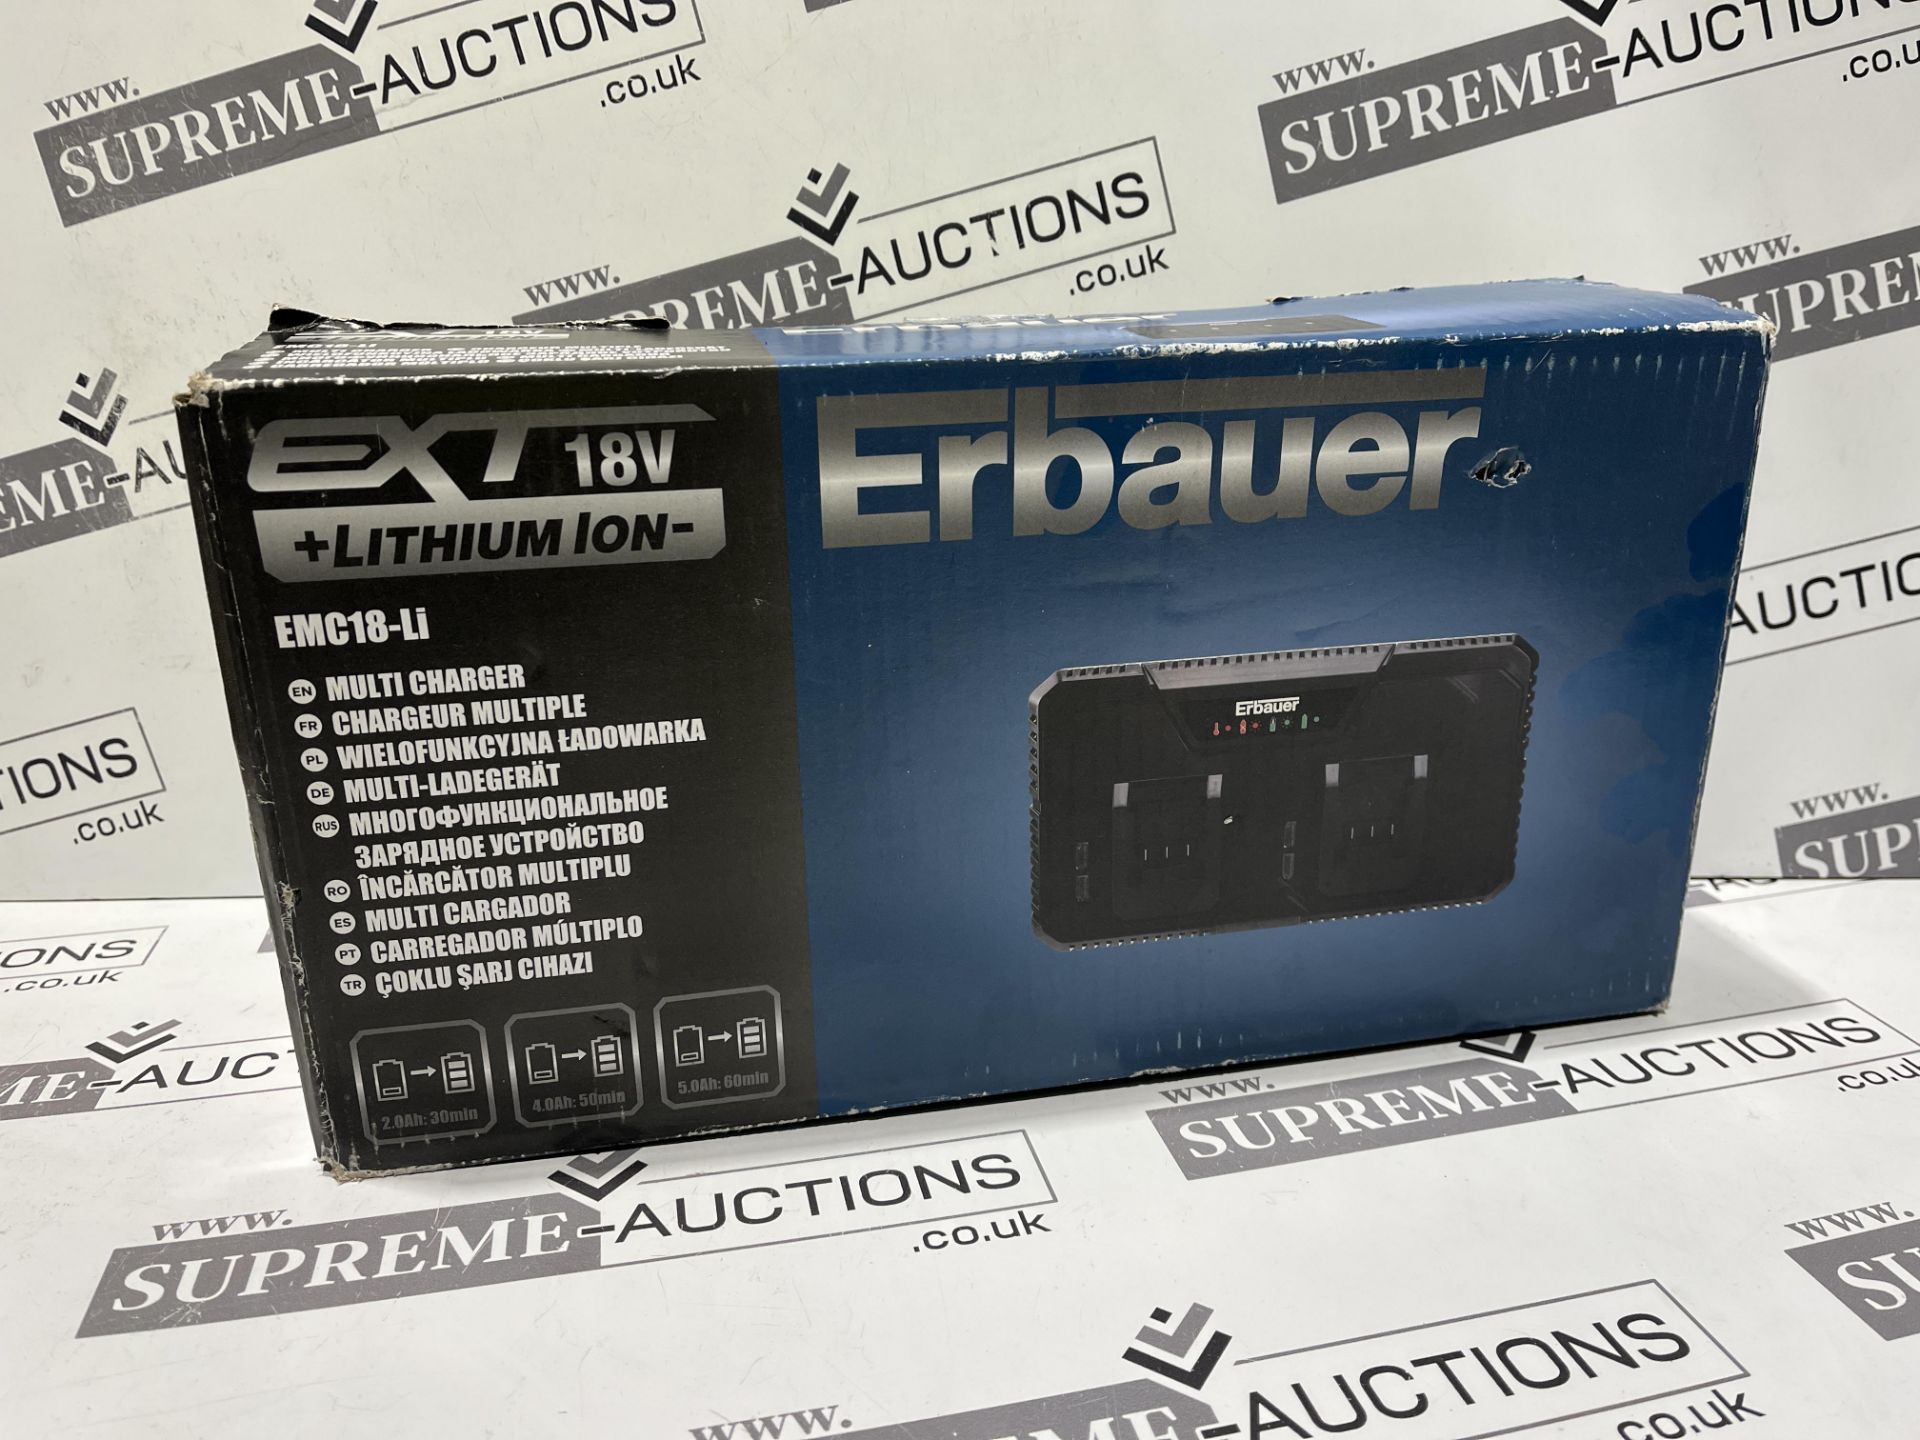 5 X ERBAUER 18V LI-ION FAST BATTERY CHARGERS P4